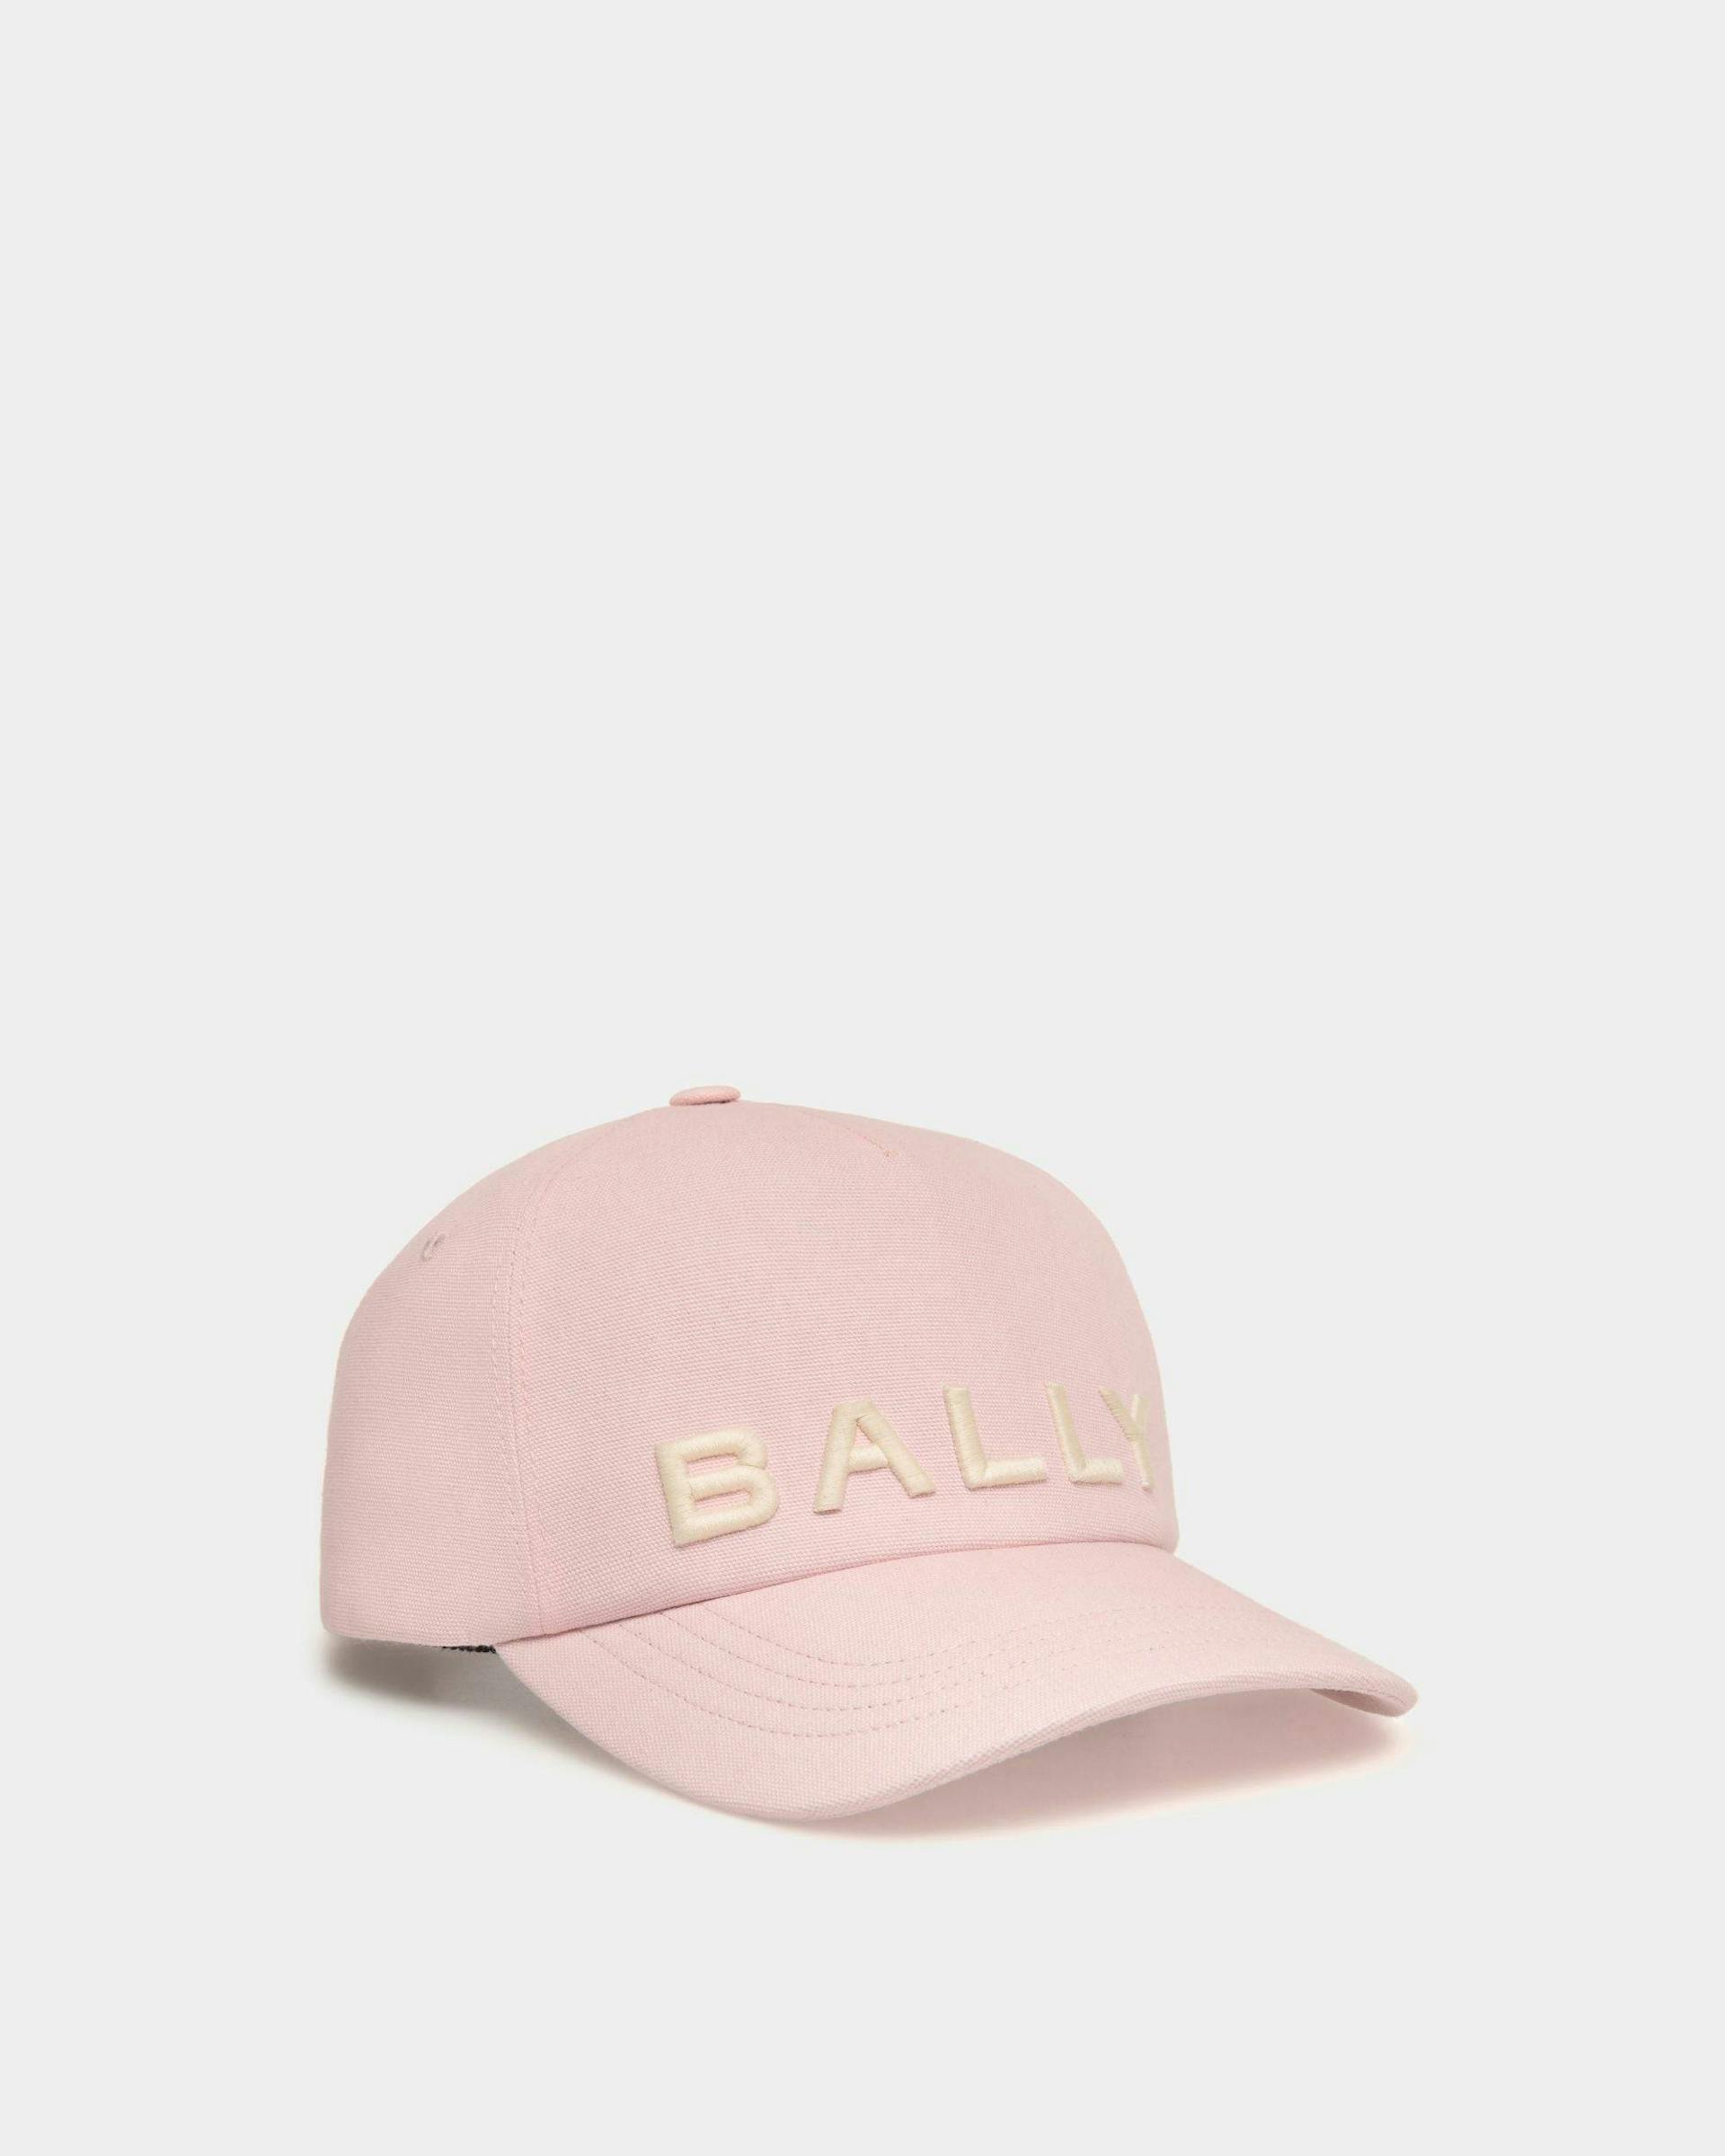 Women's Baseball Hat in Pink Cotton | Bally | Still Life Front